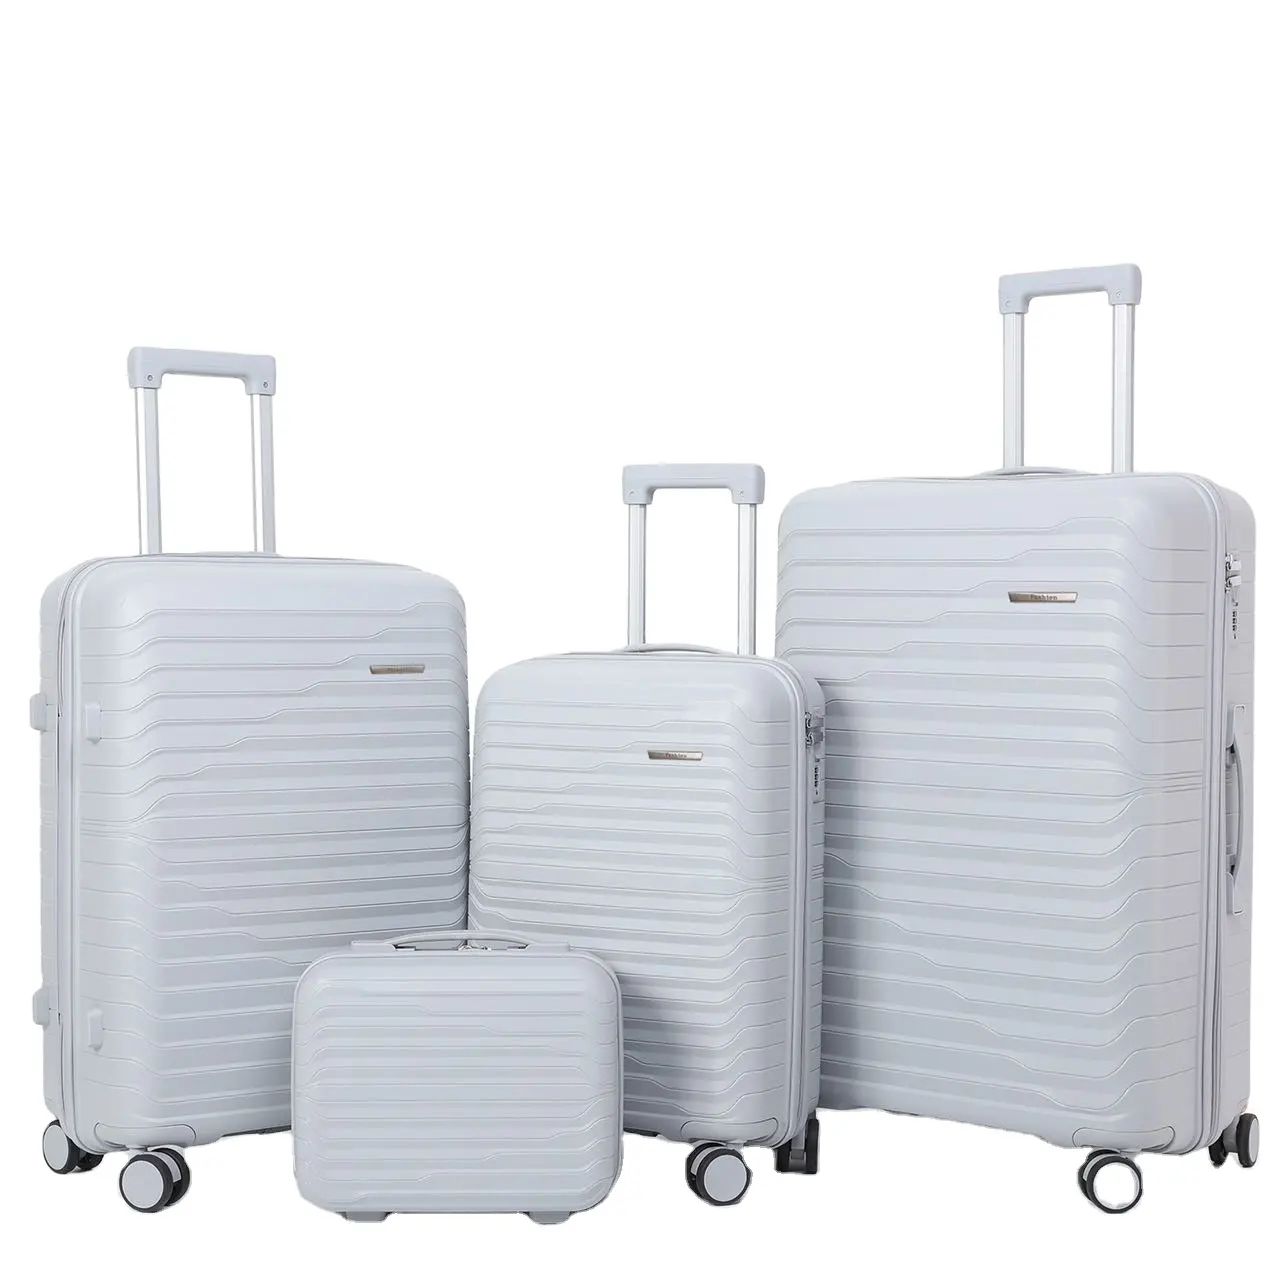 Factory customized multifunctional four piece set hard shell luggage suitcase set for trips